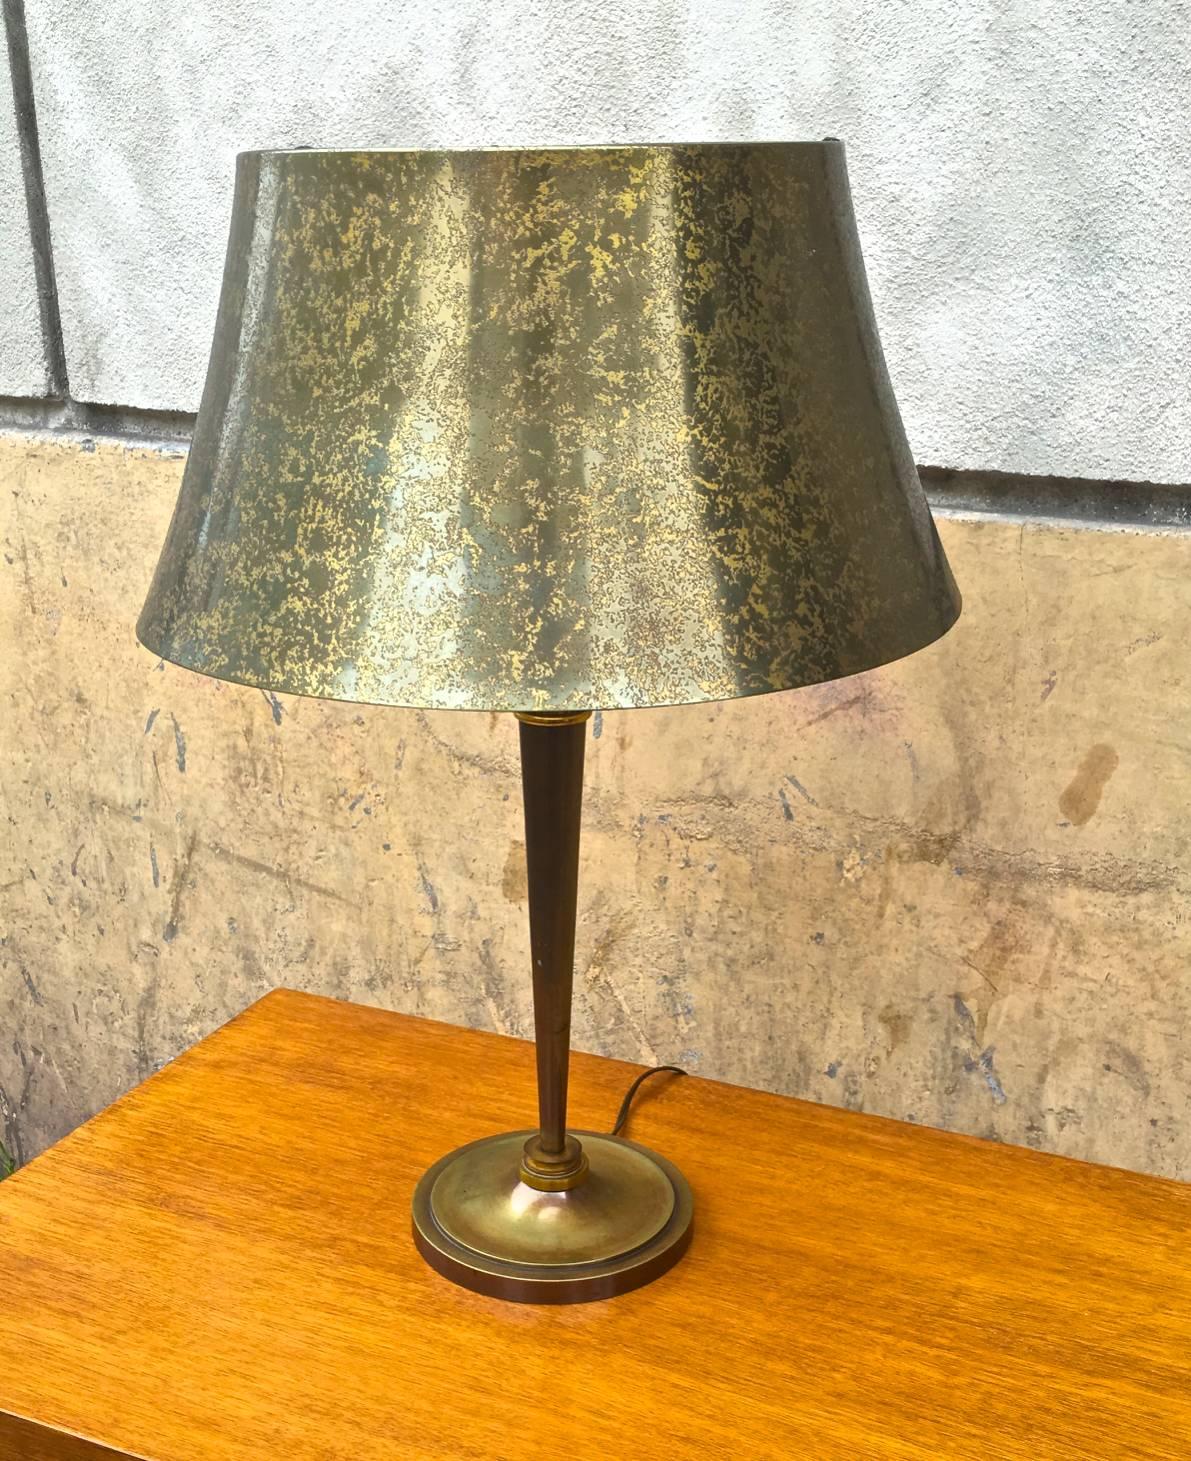 Genet Michon superb quality gold bronze desk lamp with acid engraved shade.